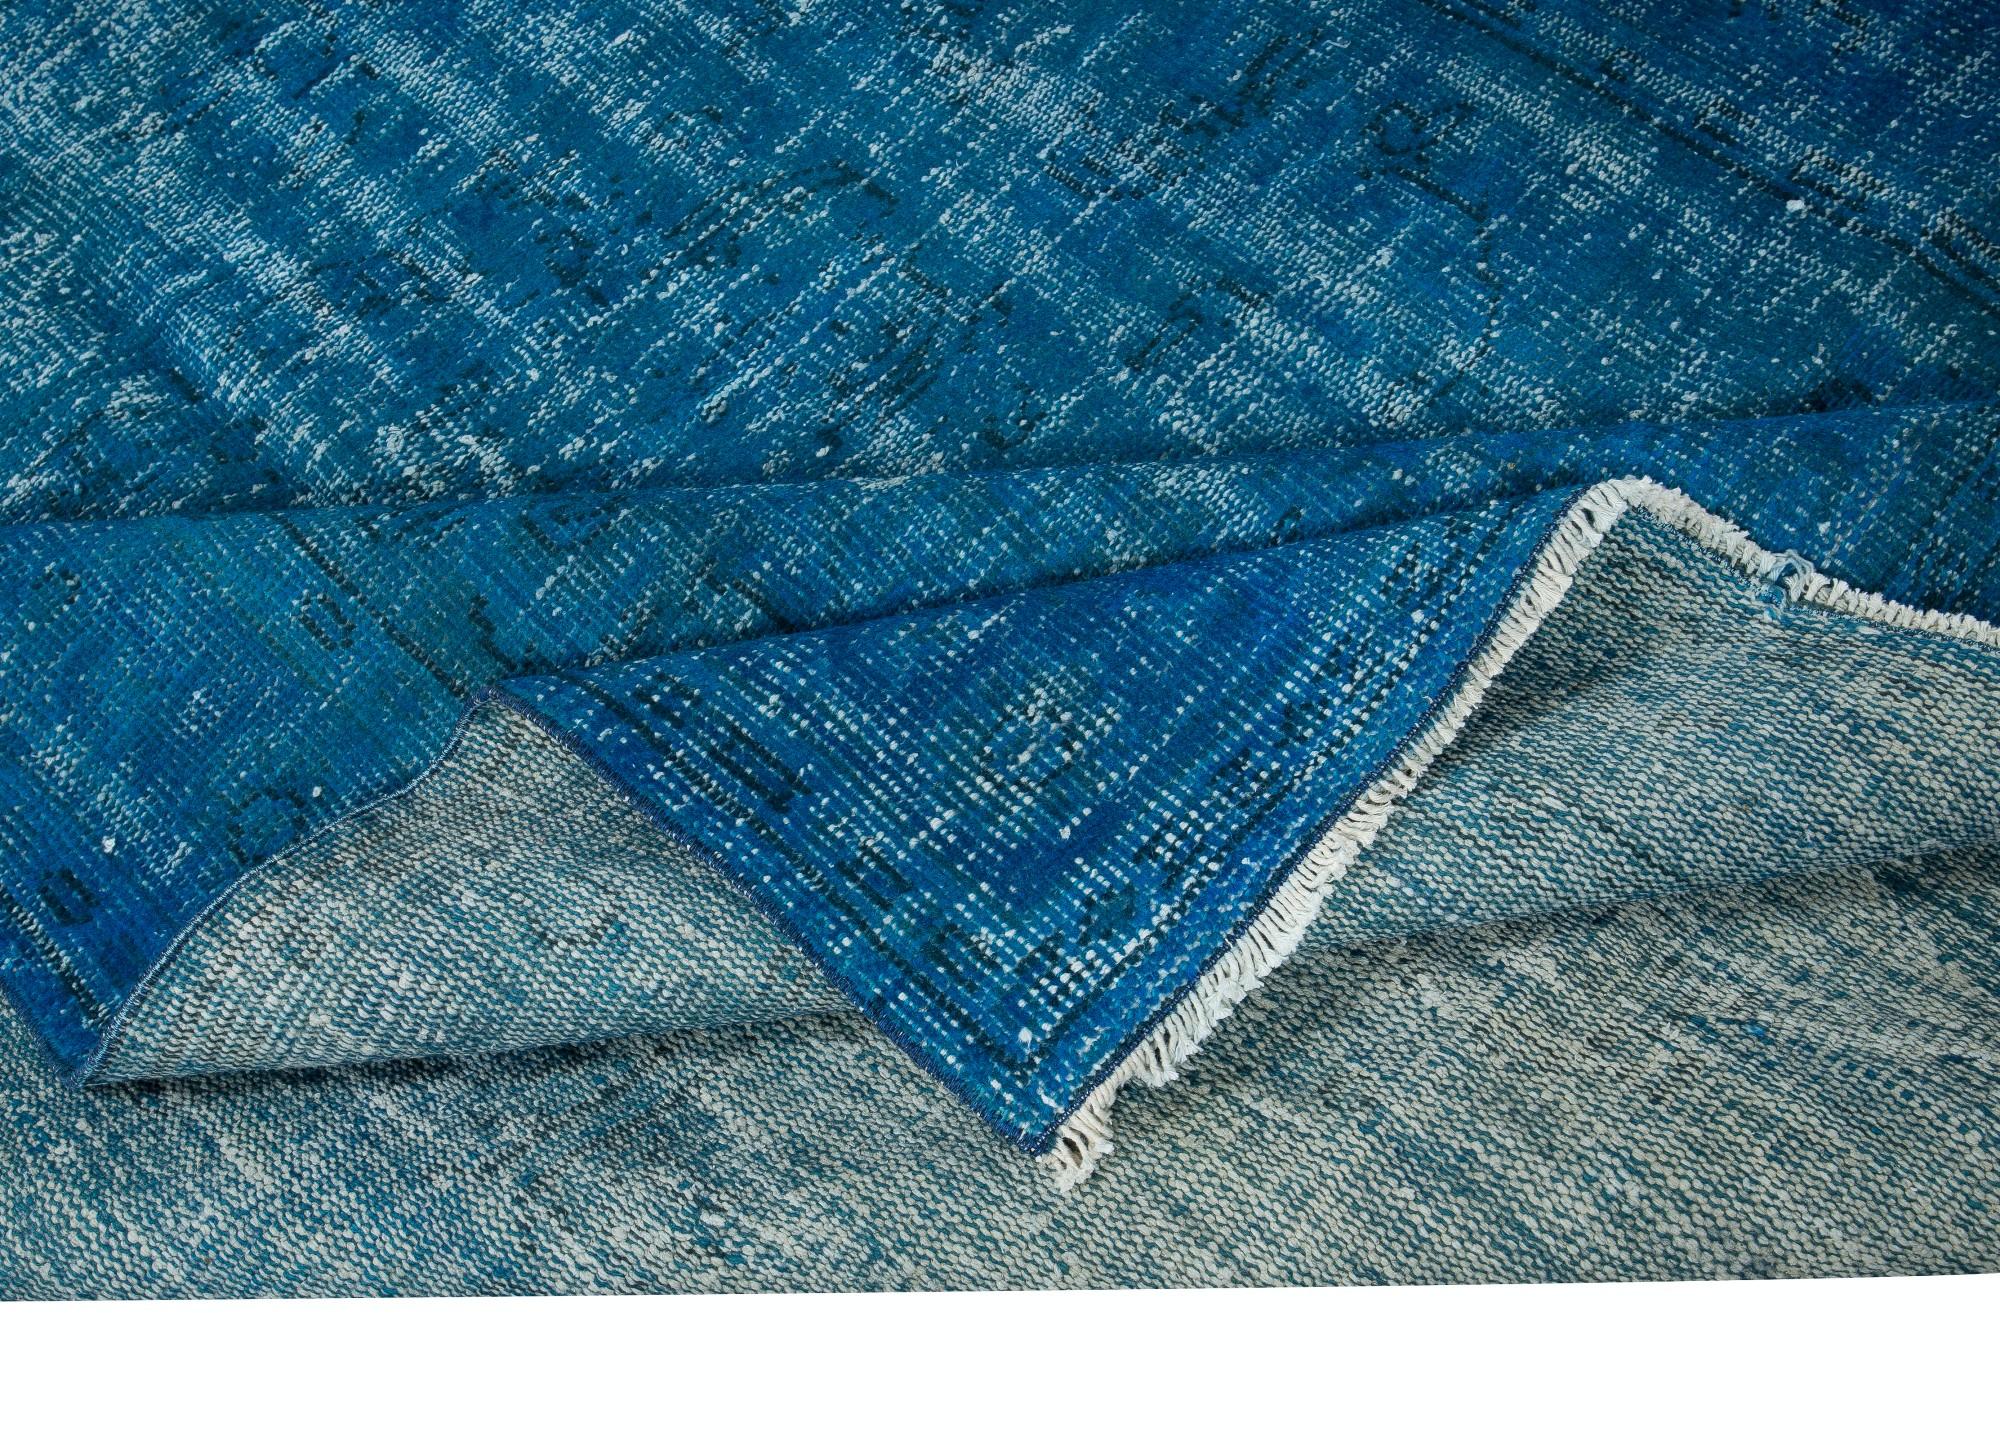 Hand-Woven 5.8x8.6 Ft Overdyed Blue Area Rug, Handmade in Turkey, Modern Upcycled Carpet For Sale